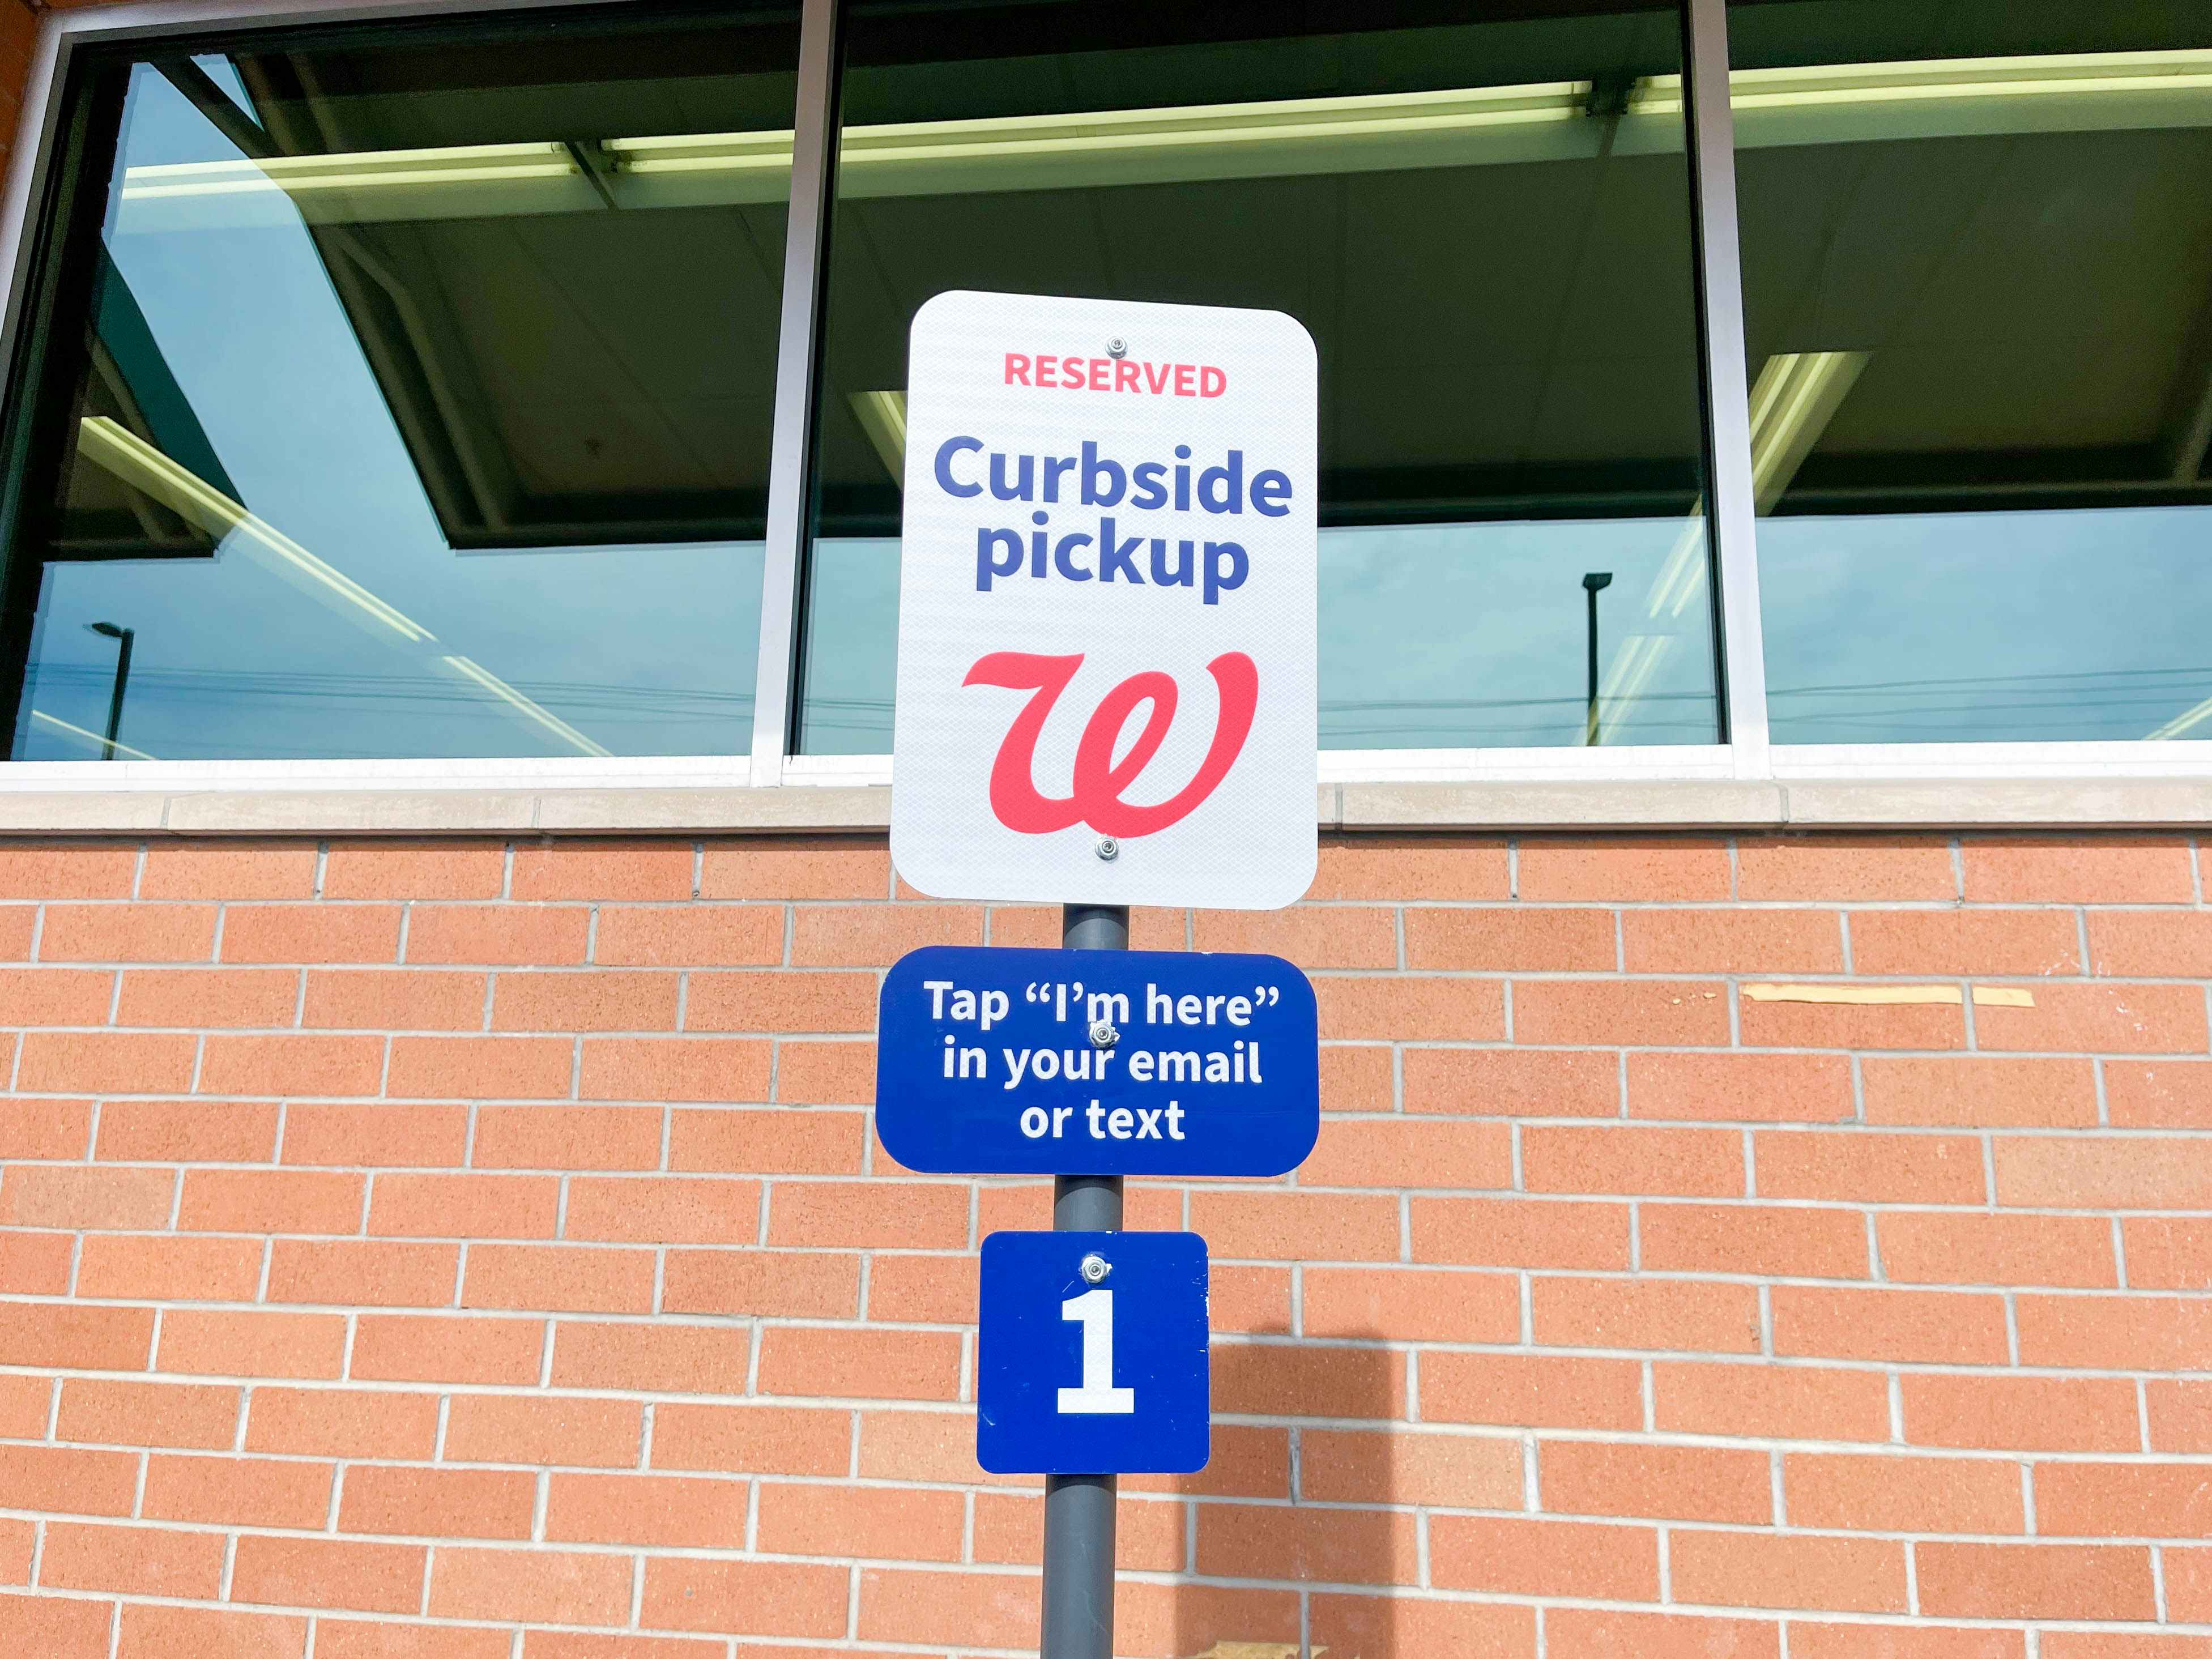 A curbside pickup sign outside of Walgreens that reads, "Reserved Curbside Pickup. Tap 'I'm here' in your email or text